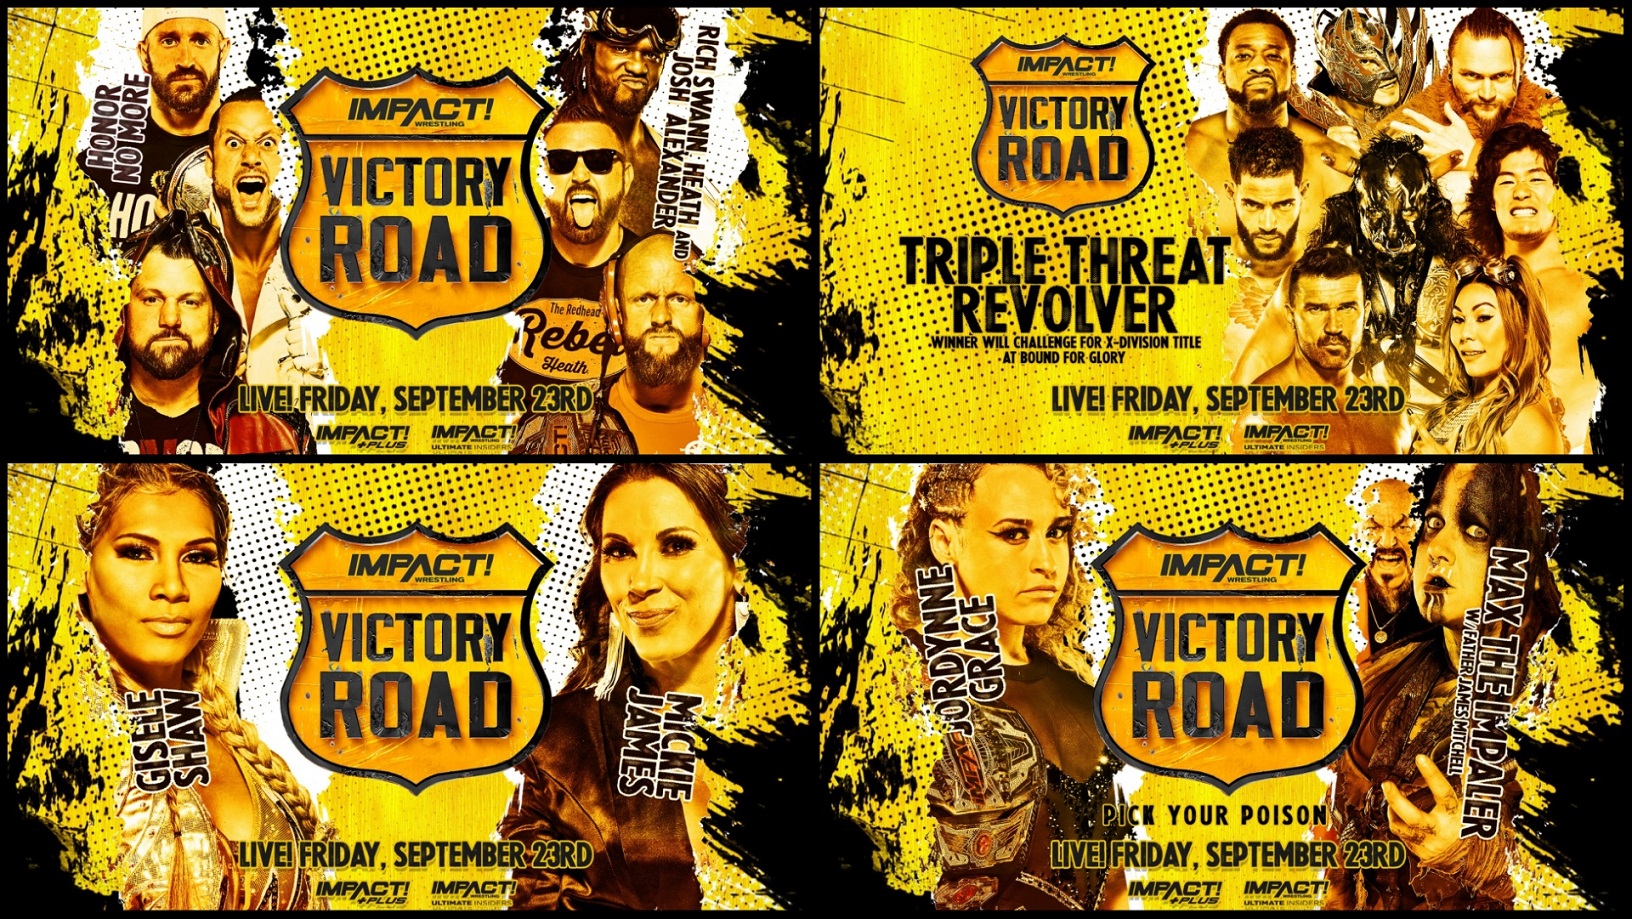 Six-Man Mayhem, A Career-Threatening Match for Mickie James, The Return of Triple Threat Revolver & More Added to Victory Road